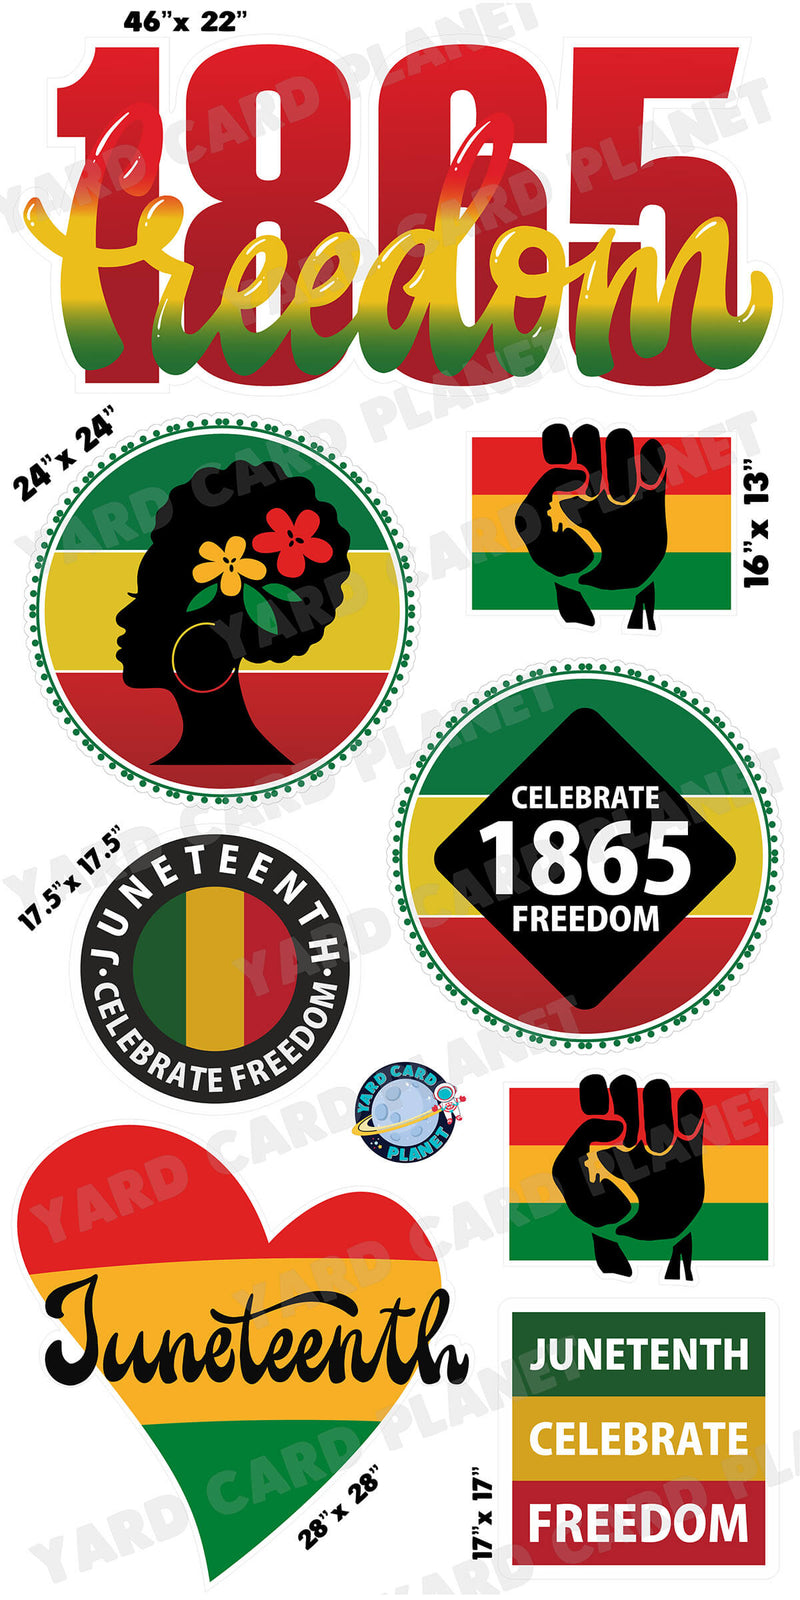 Juneteenth 1865 Freedom EZ Quick Sign and Yard Card Flair Set